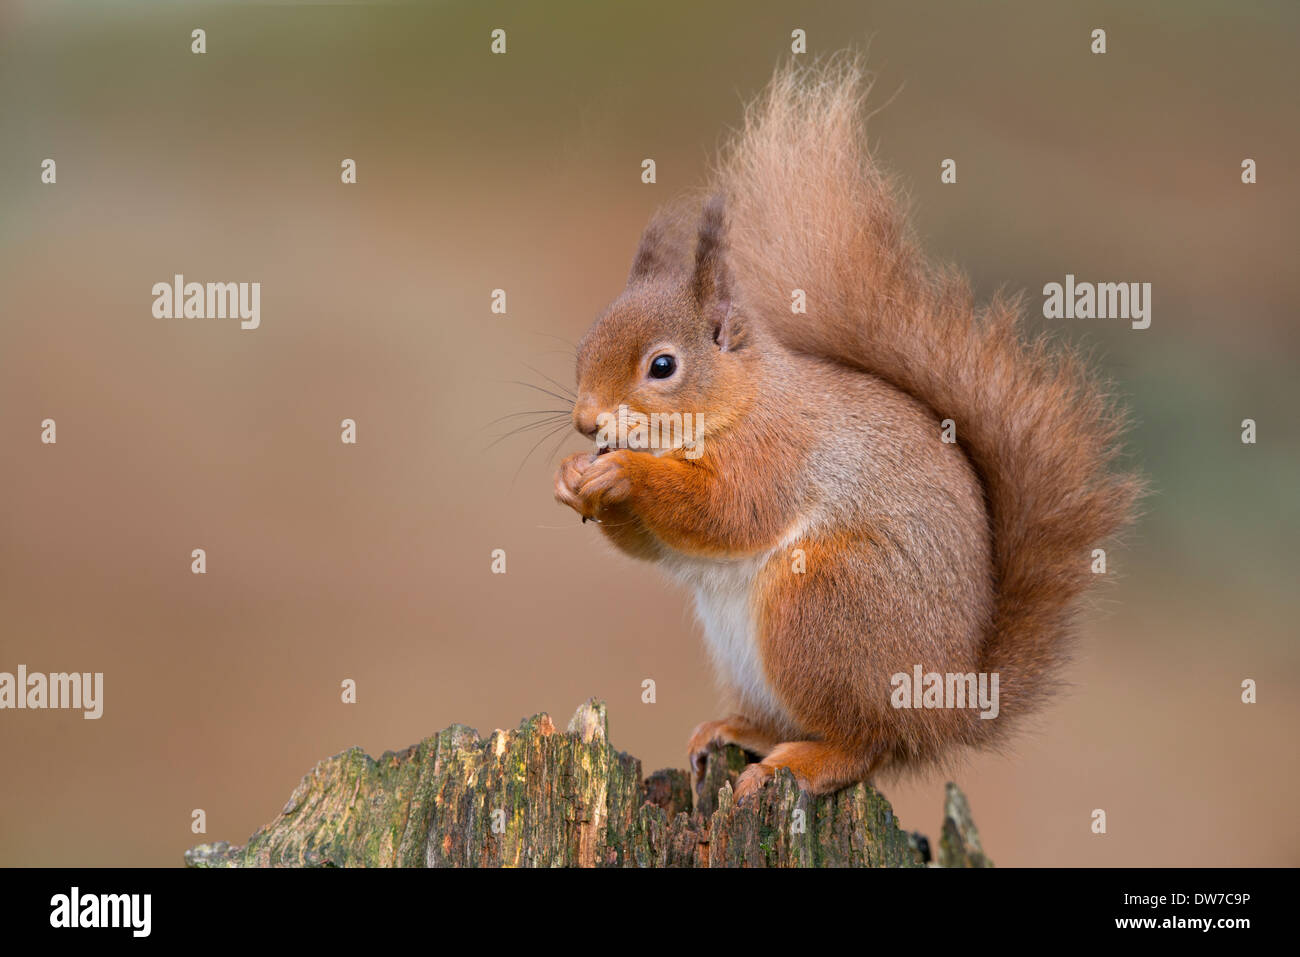 red squirrel sat on old tree stump looking left Stock Photo